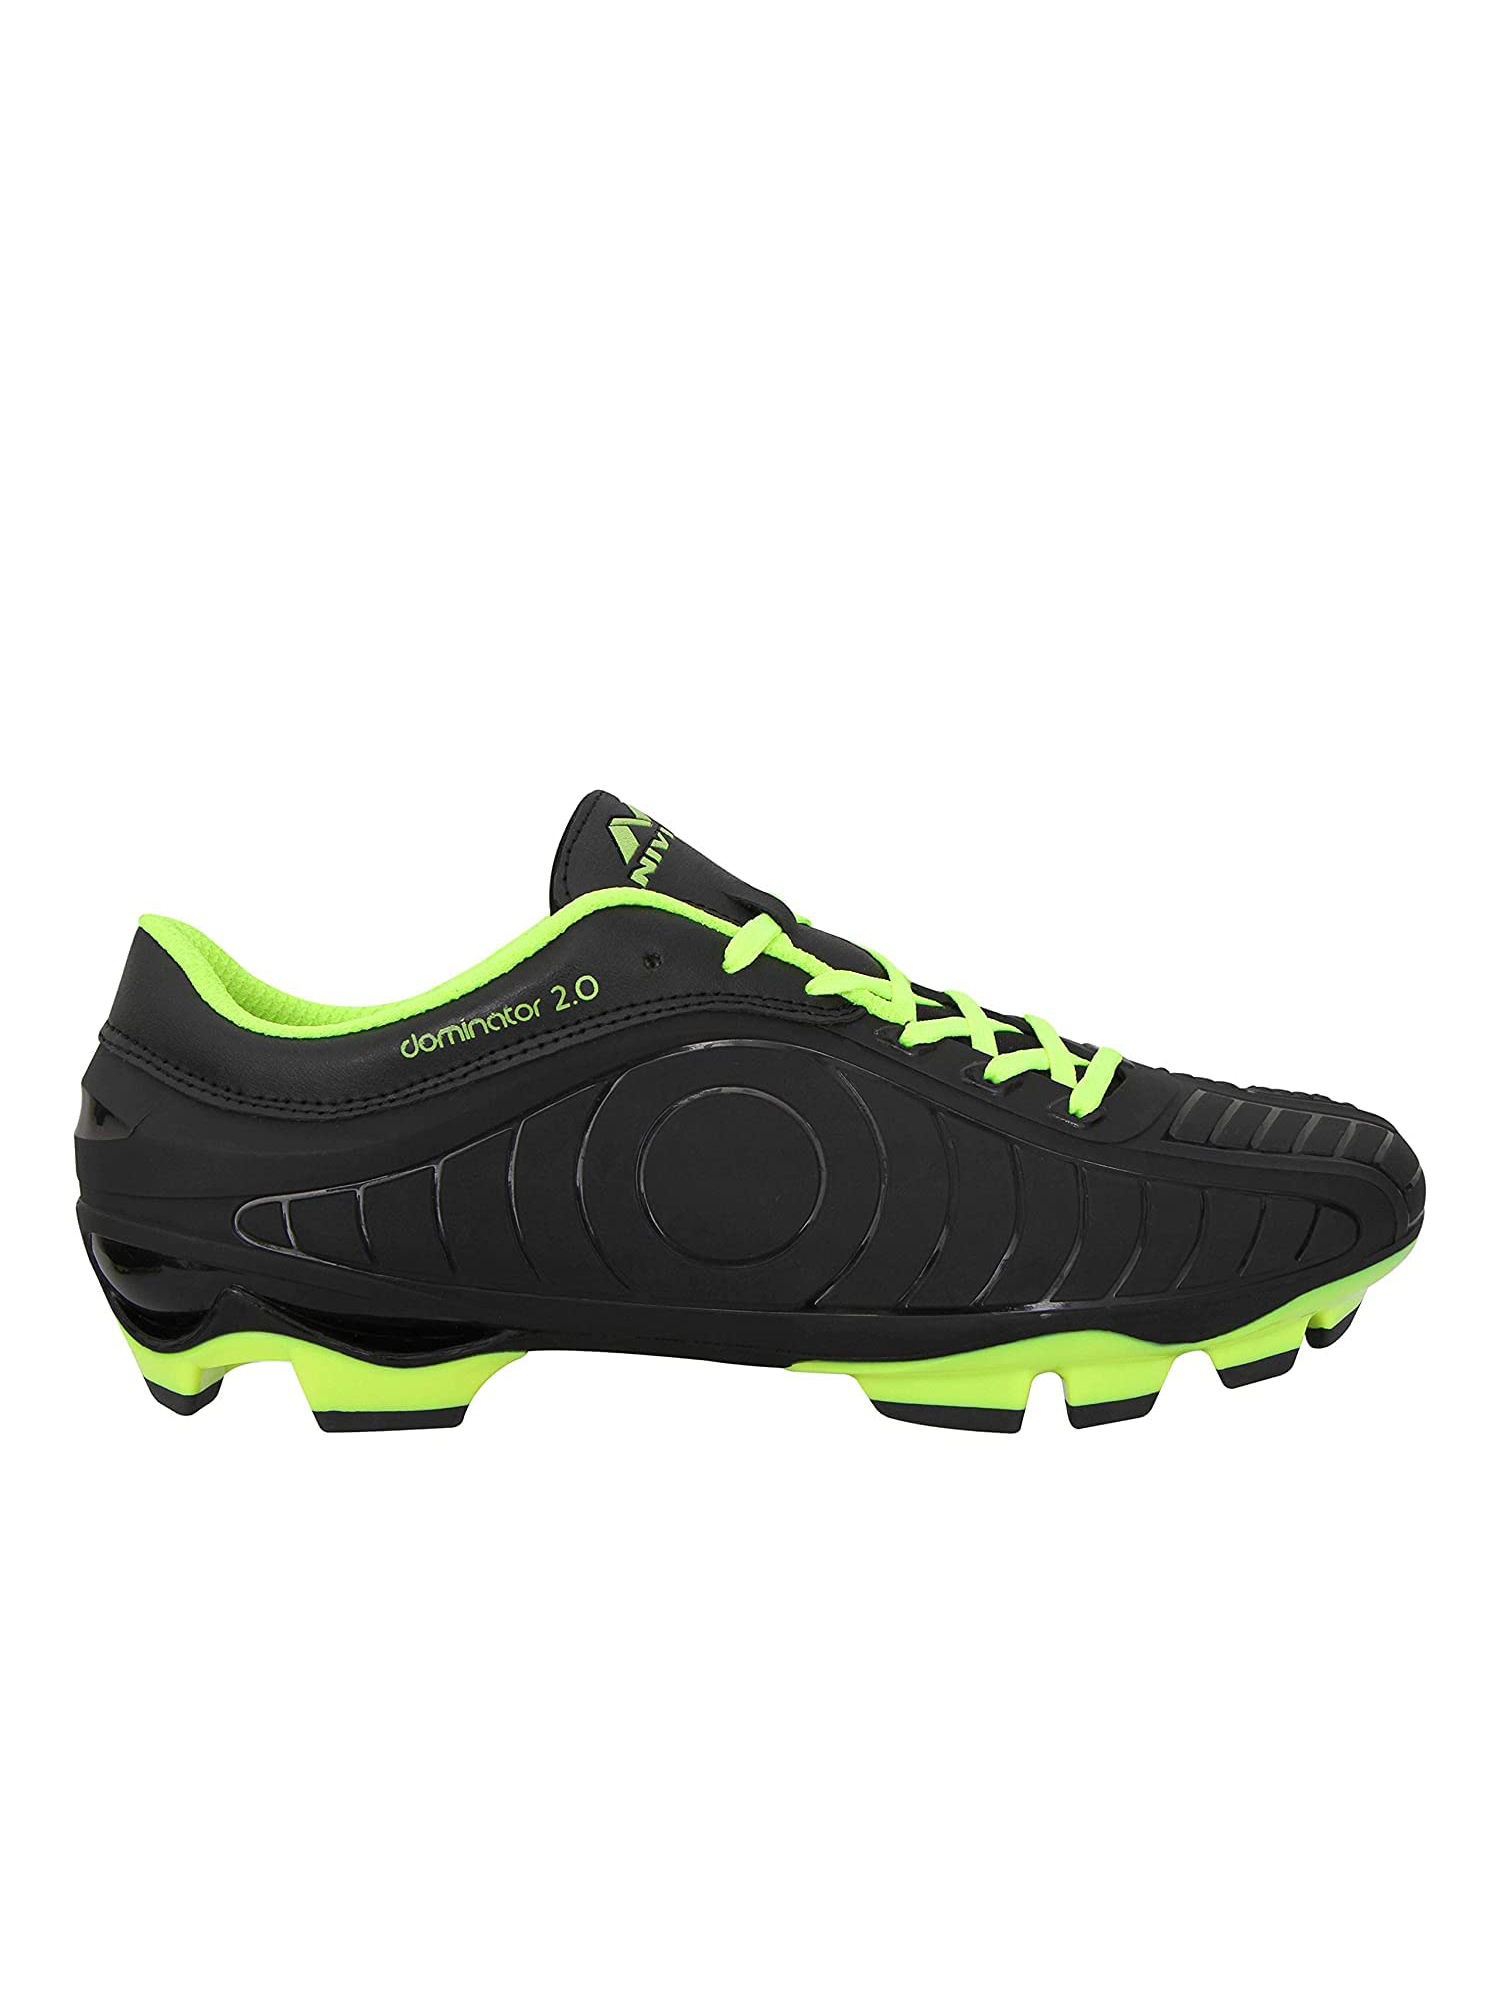 Buy Nivia Football Shoes Online in India | Myntra